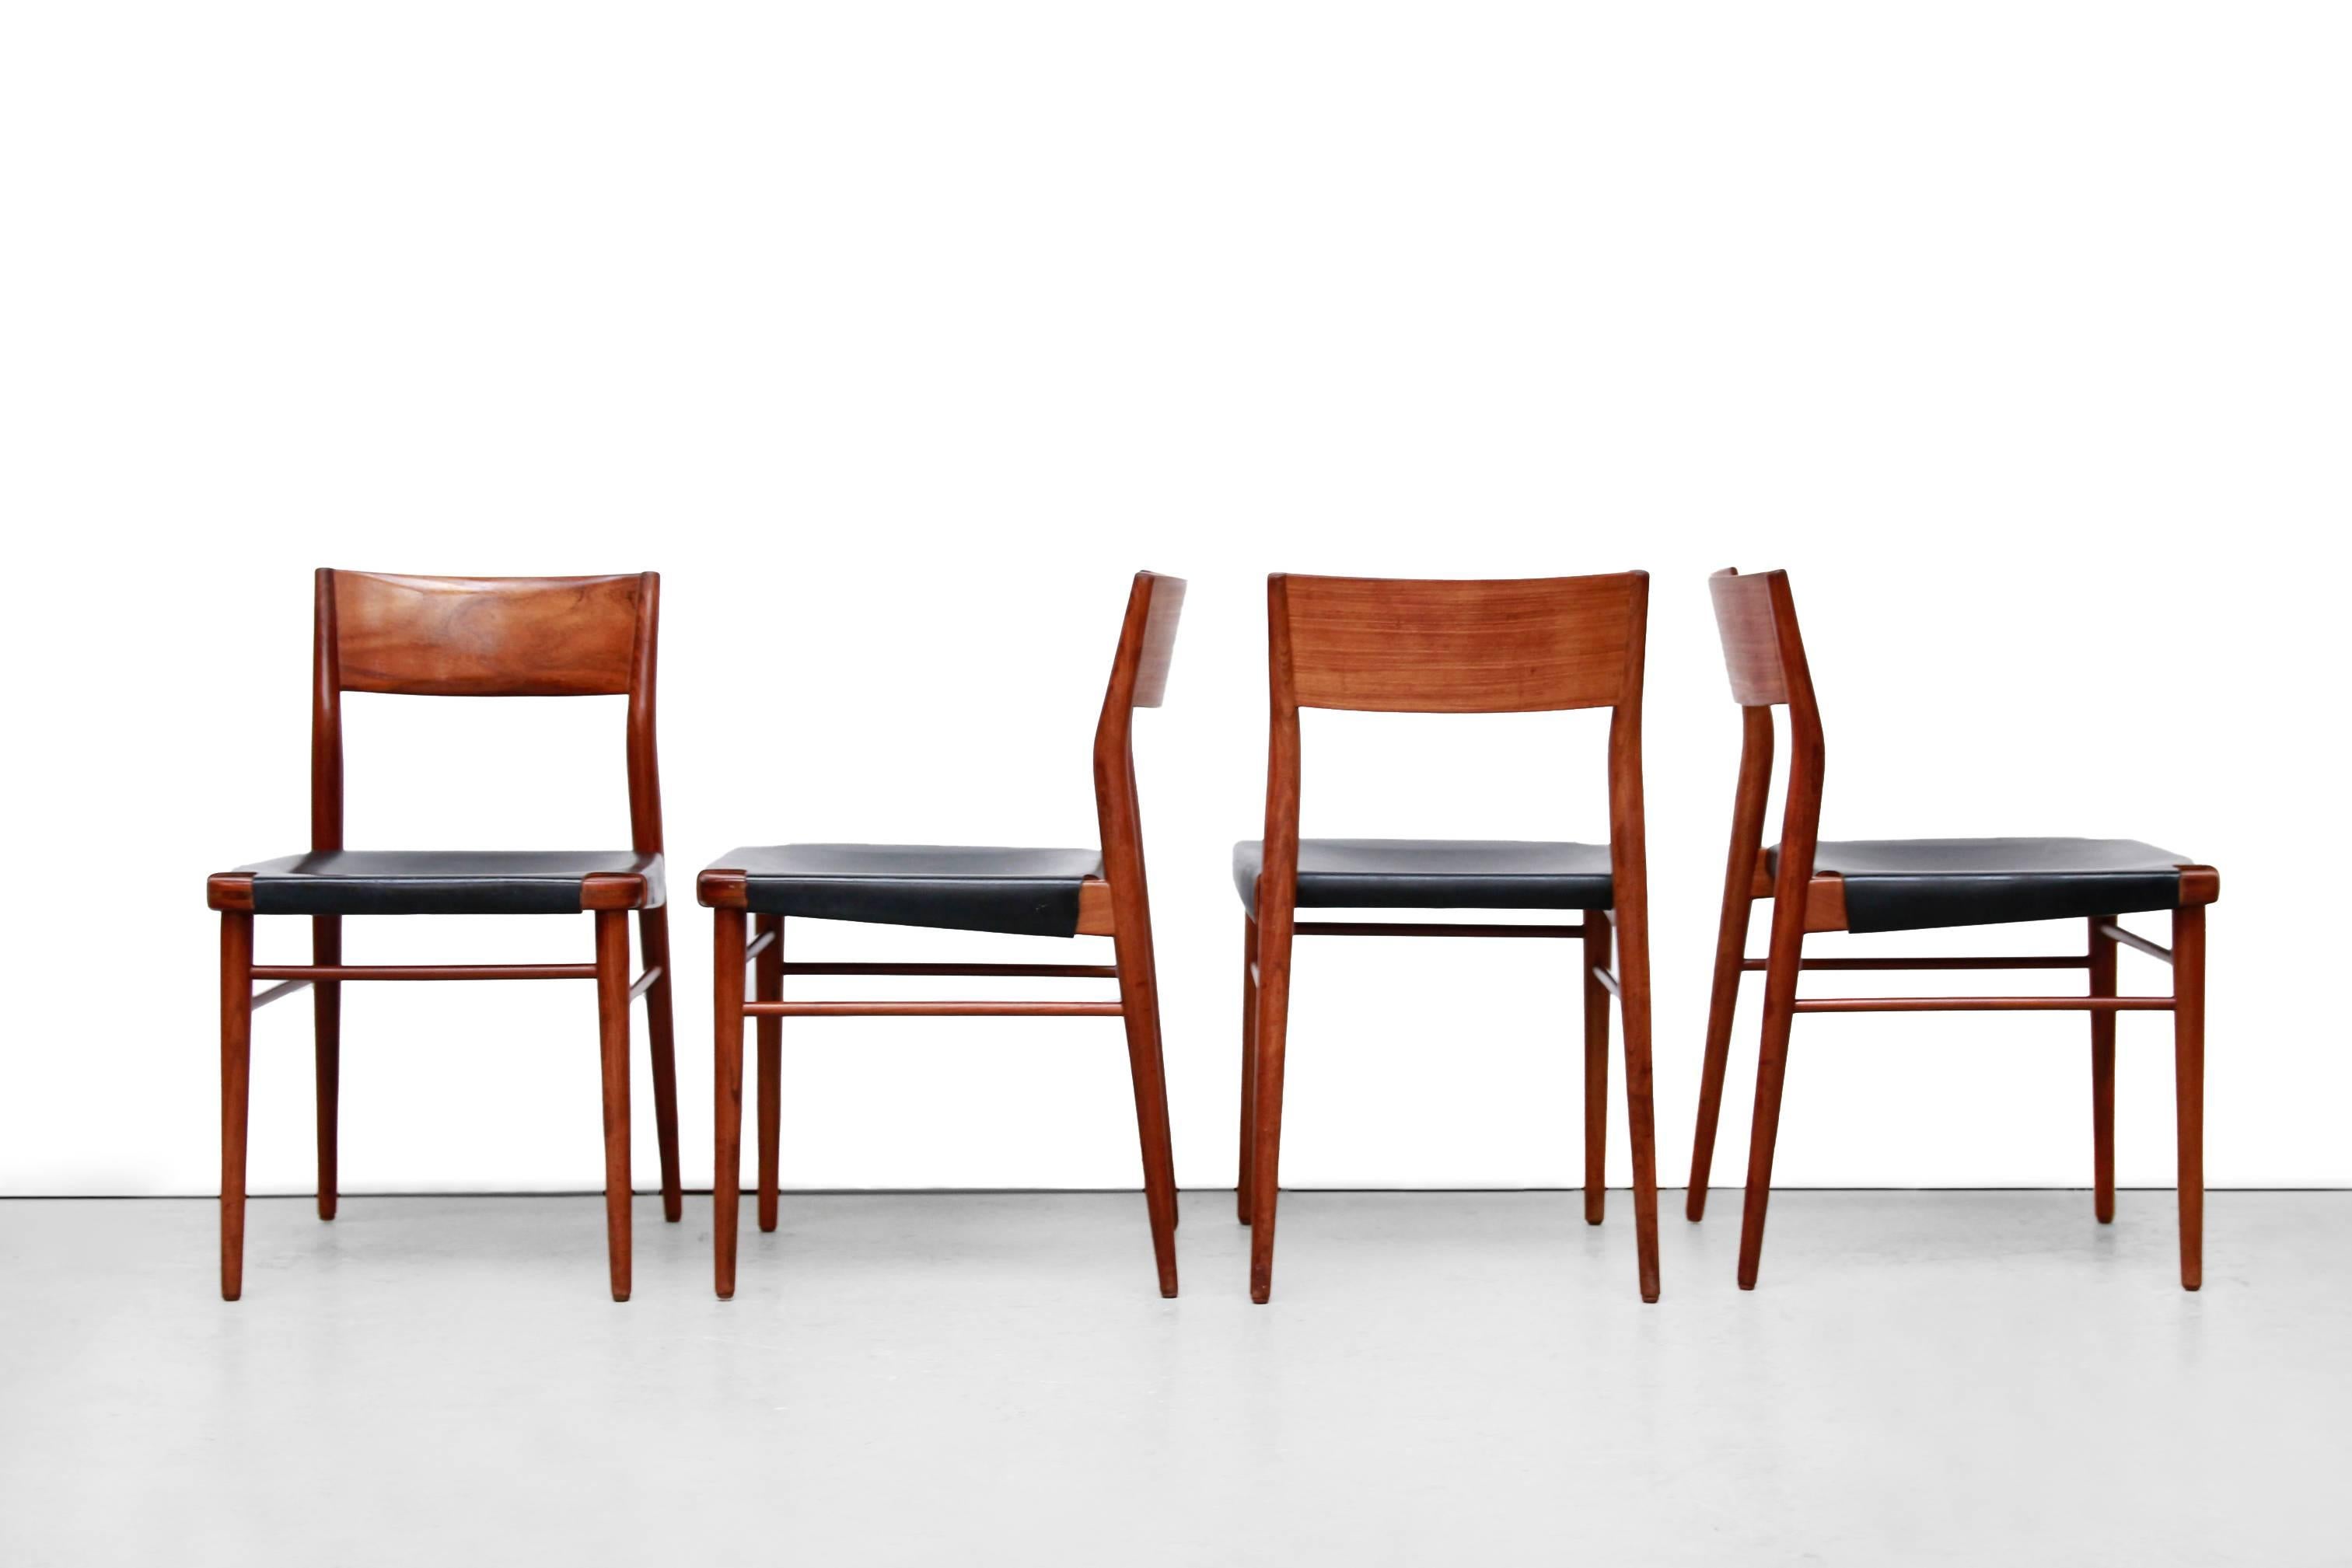 Very nice set of four dining room chairs designed by the German architect and furniture designer Georg Leowald and produced by Wilkhahn. The chairs with model name 351 are made of solid teak wood with a beautiful wood connection between the seat and